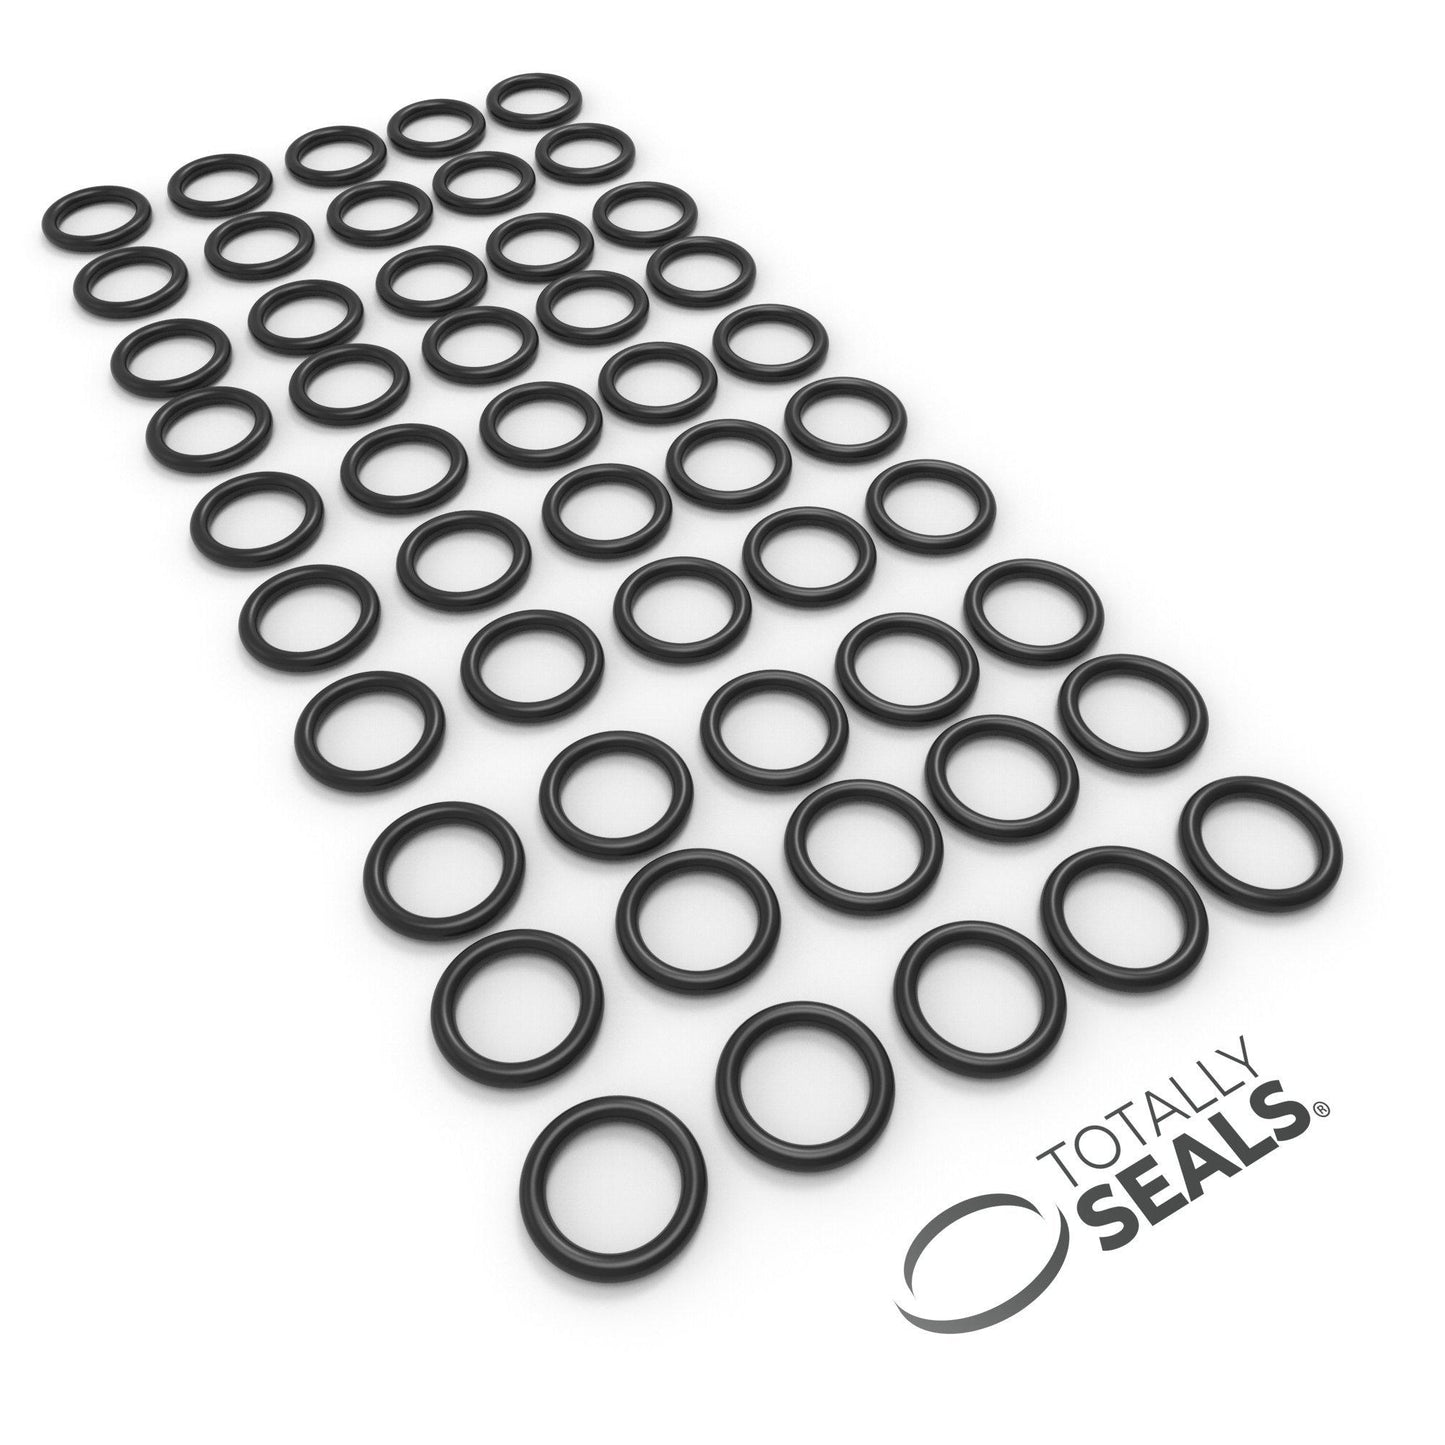 22mm x 1.5mm (25mm OD) Nitrile O-Rings - Totally Seals®